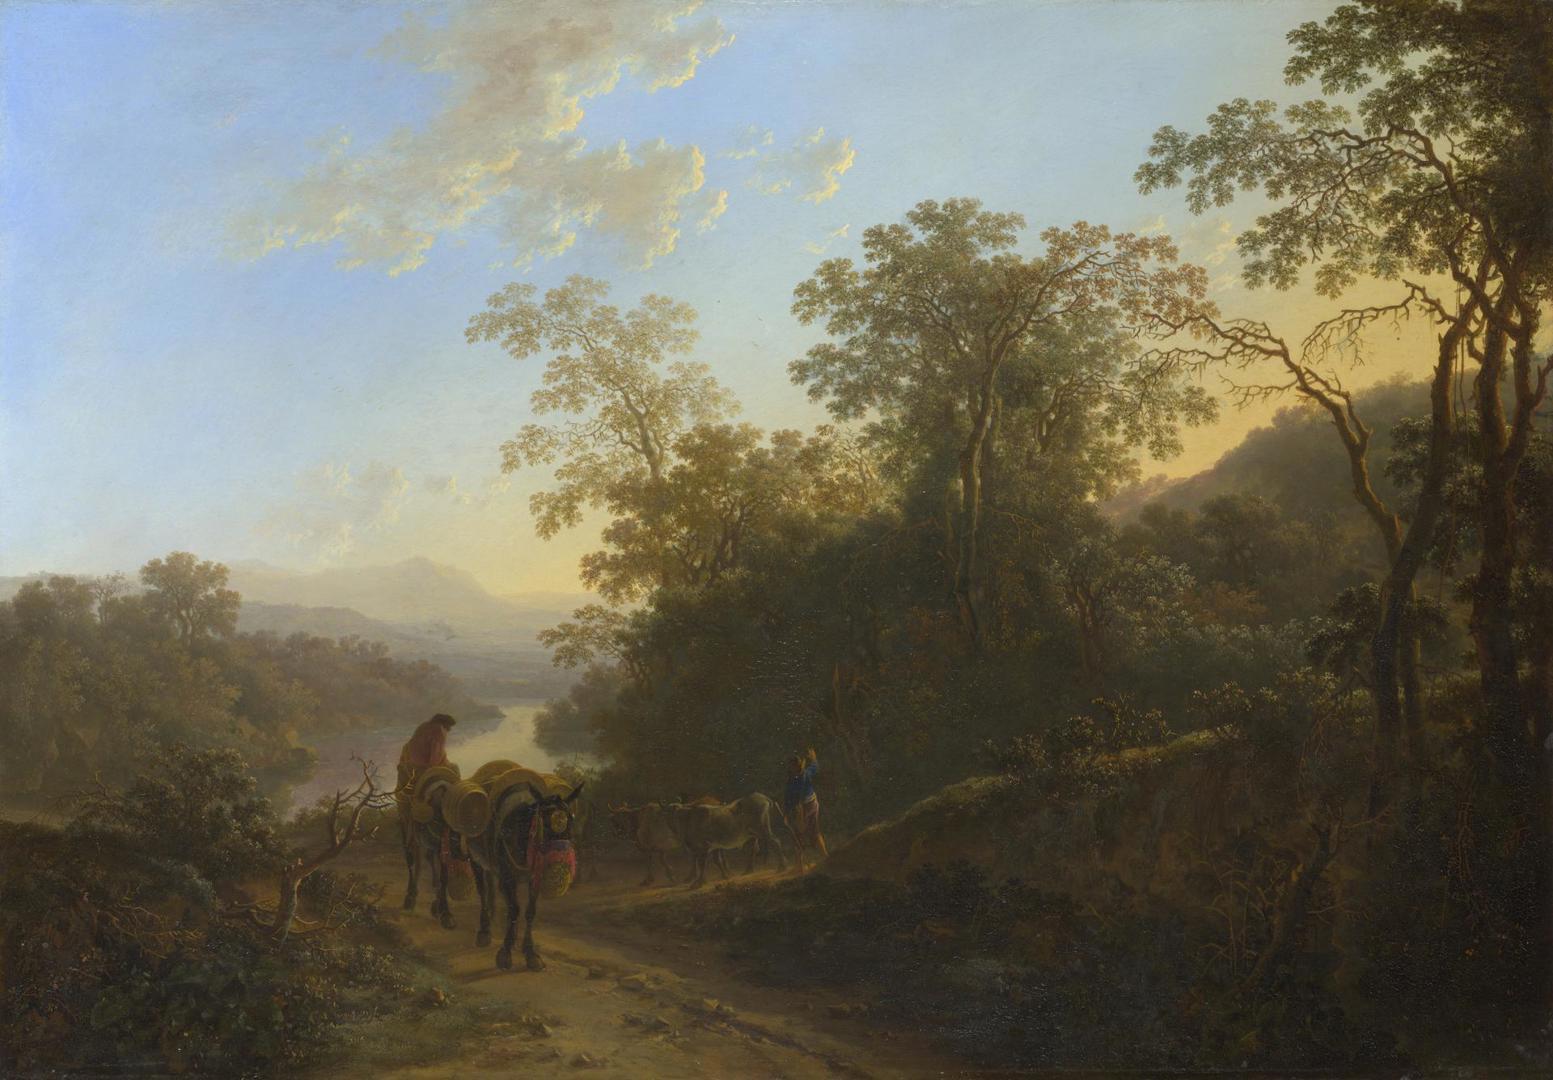 Peasants with Mules and Oxen by Jan Both